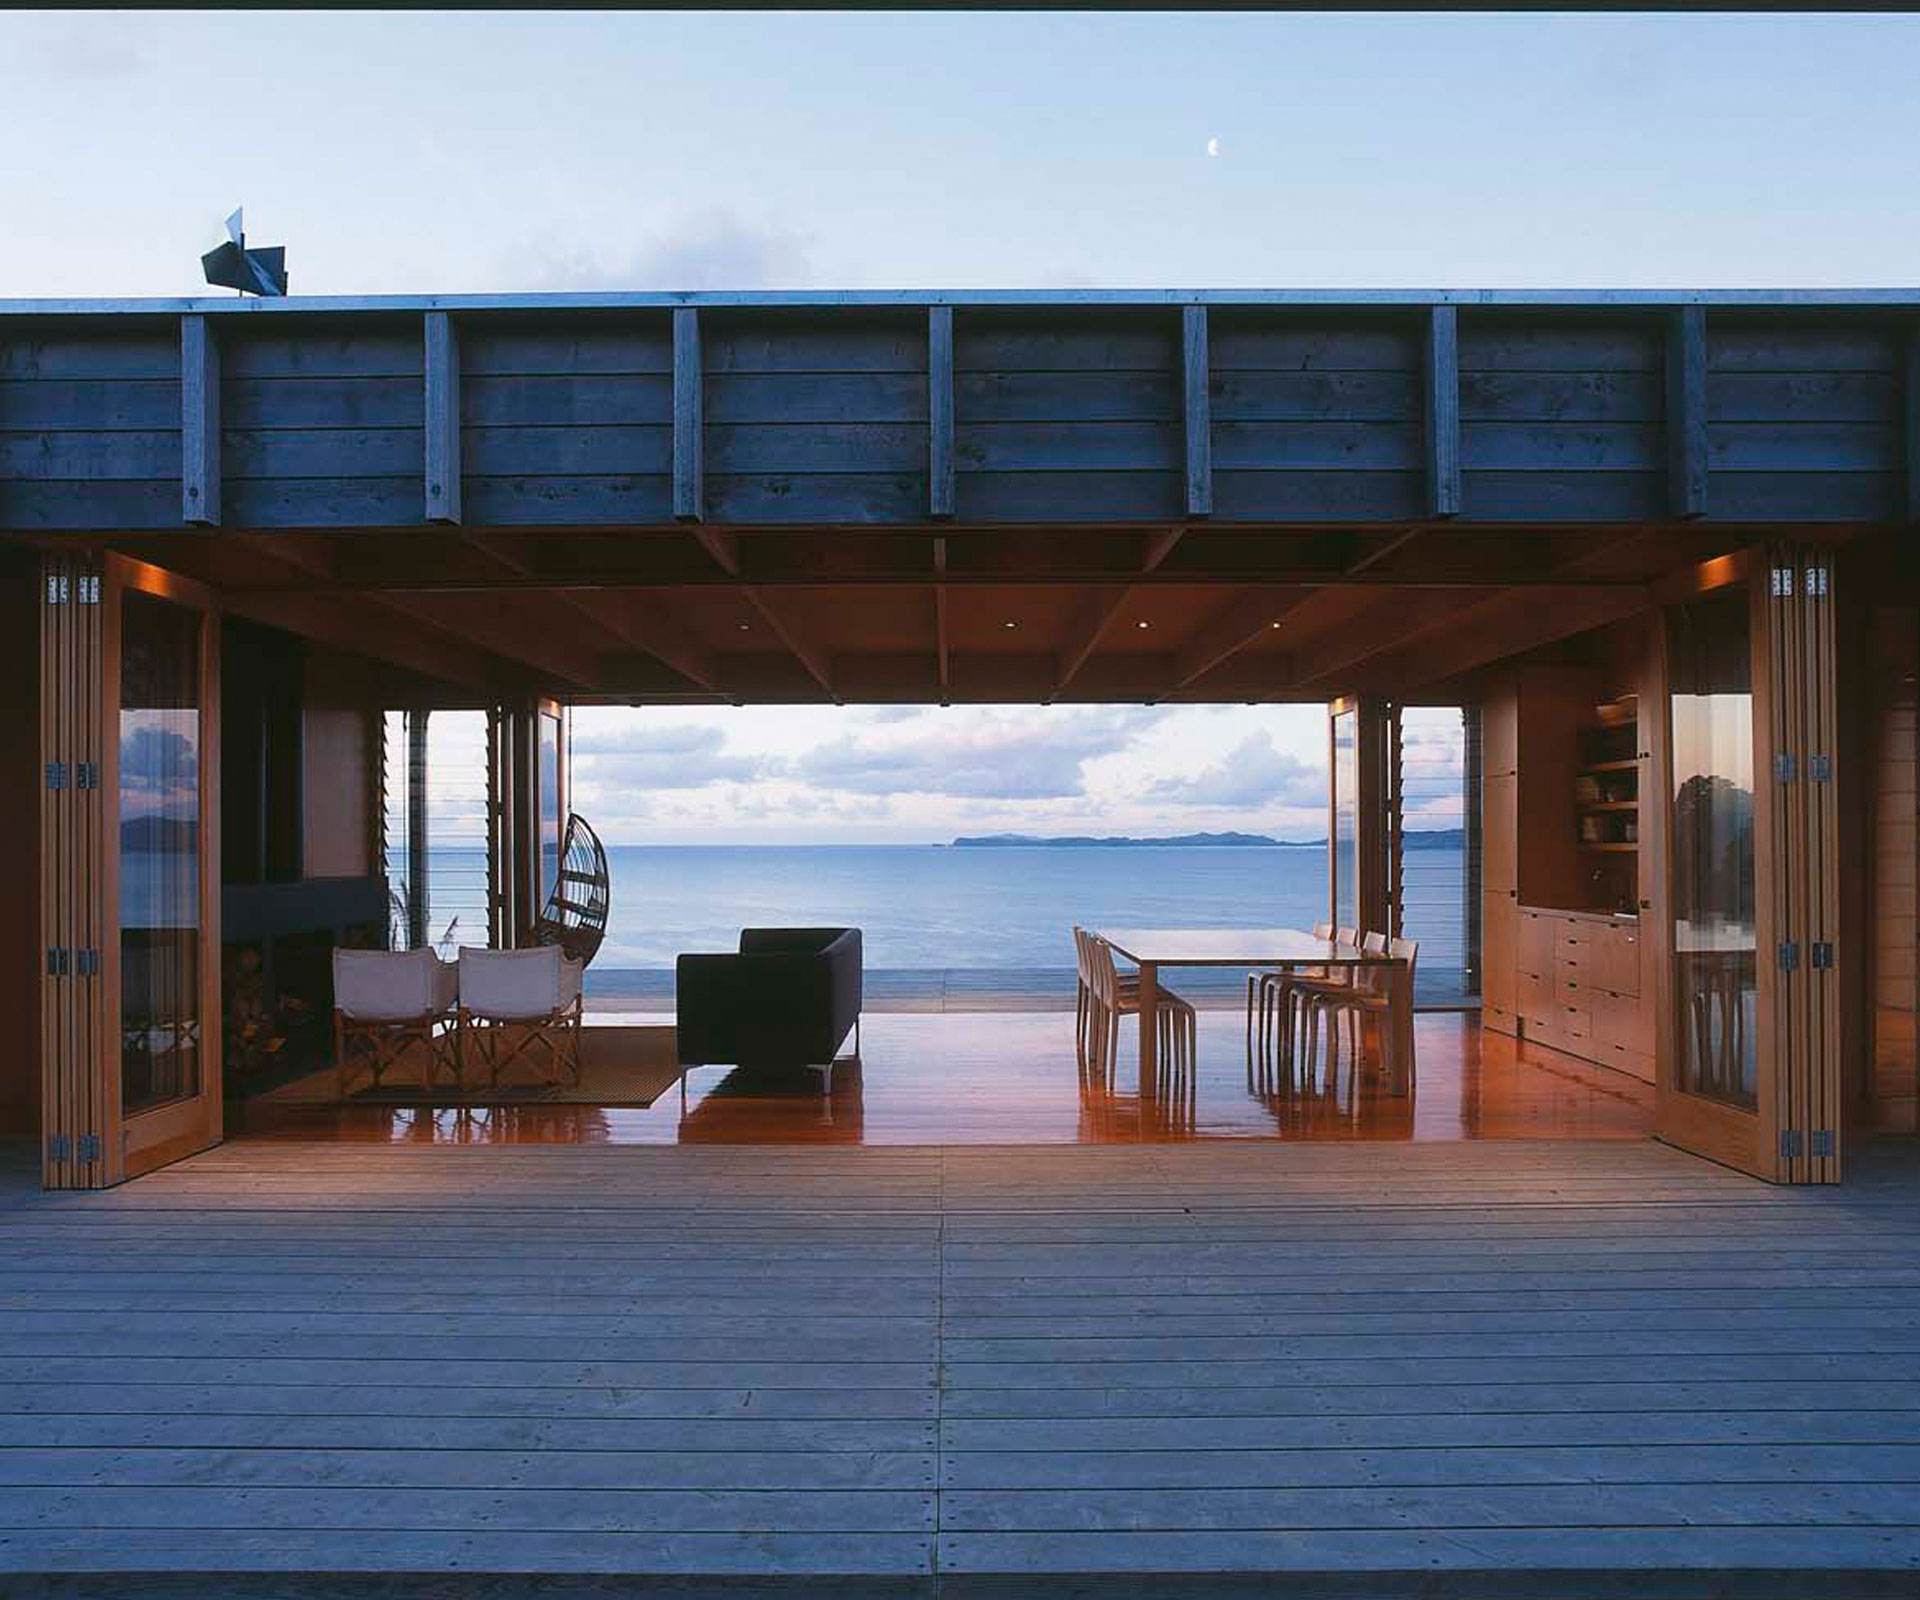 Ken Crosson won the 2003 Home of the Year title with the design of his own Coromandel bach. Photograph by Patrick Reynolds.